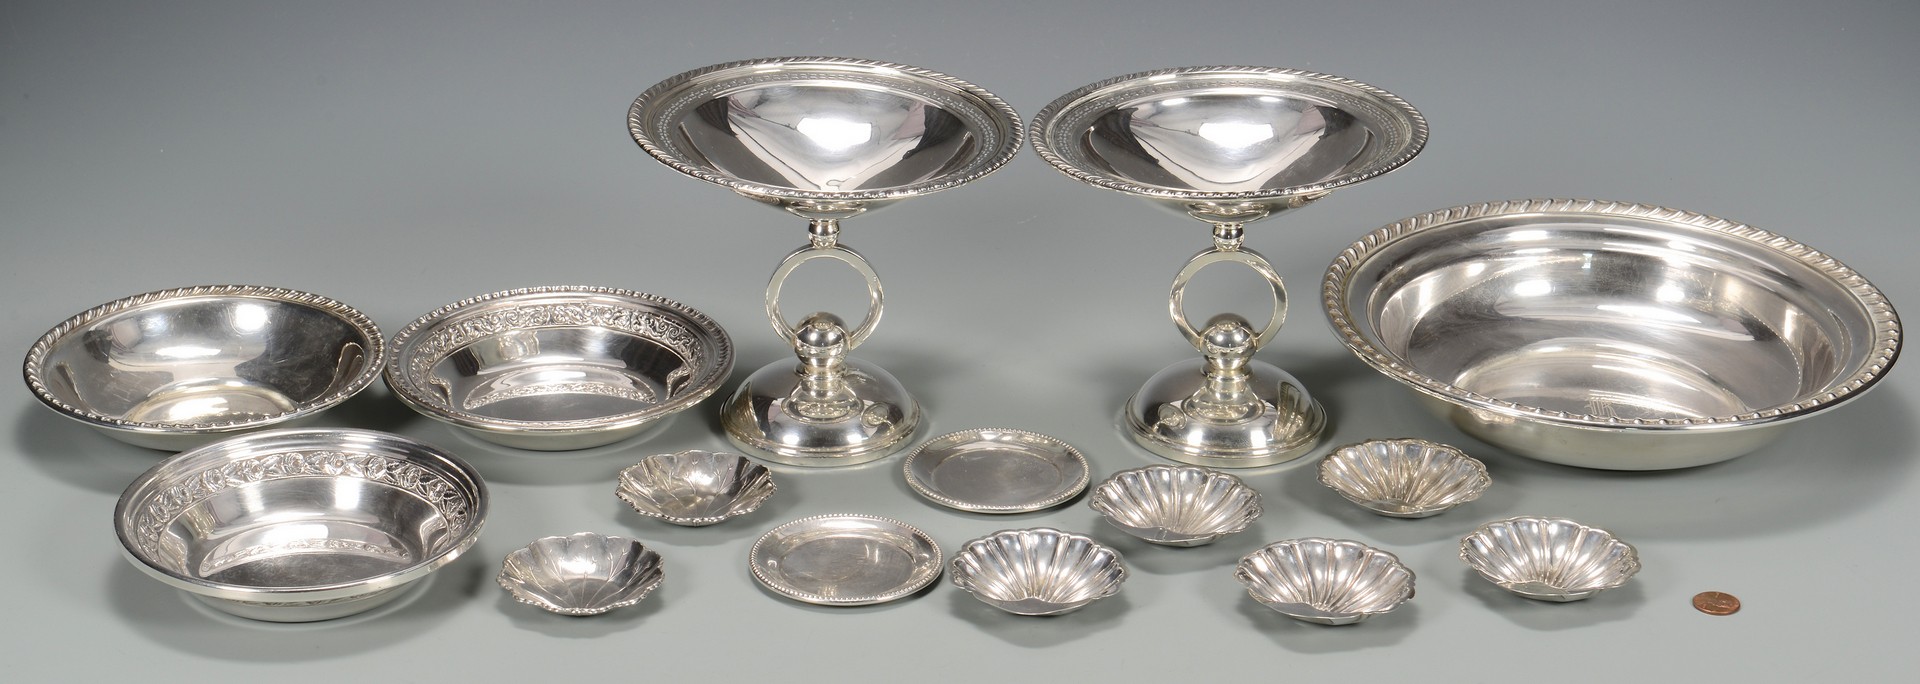 Lot 814: 15 Sterling Silver Table Items